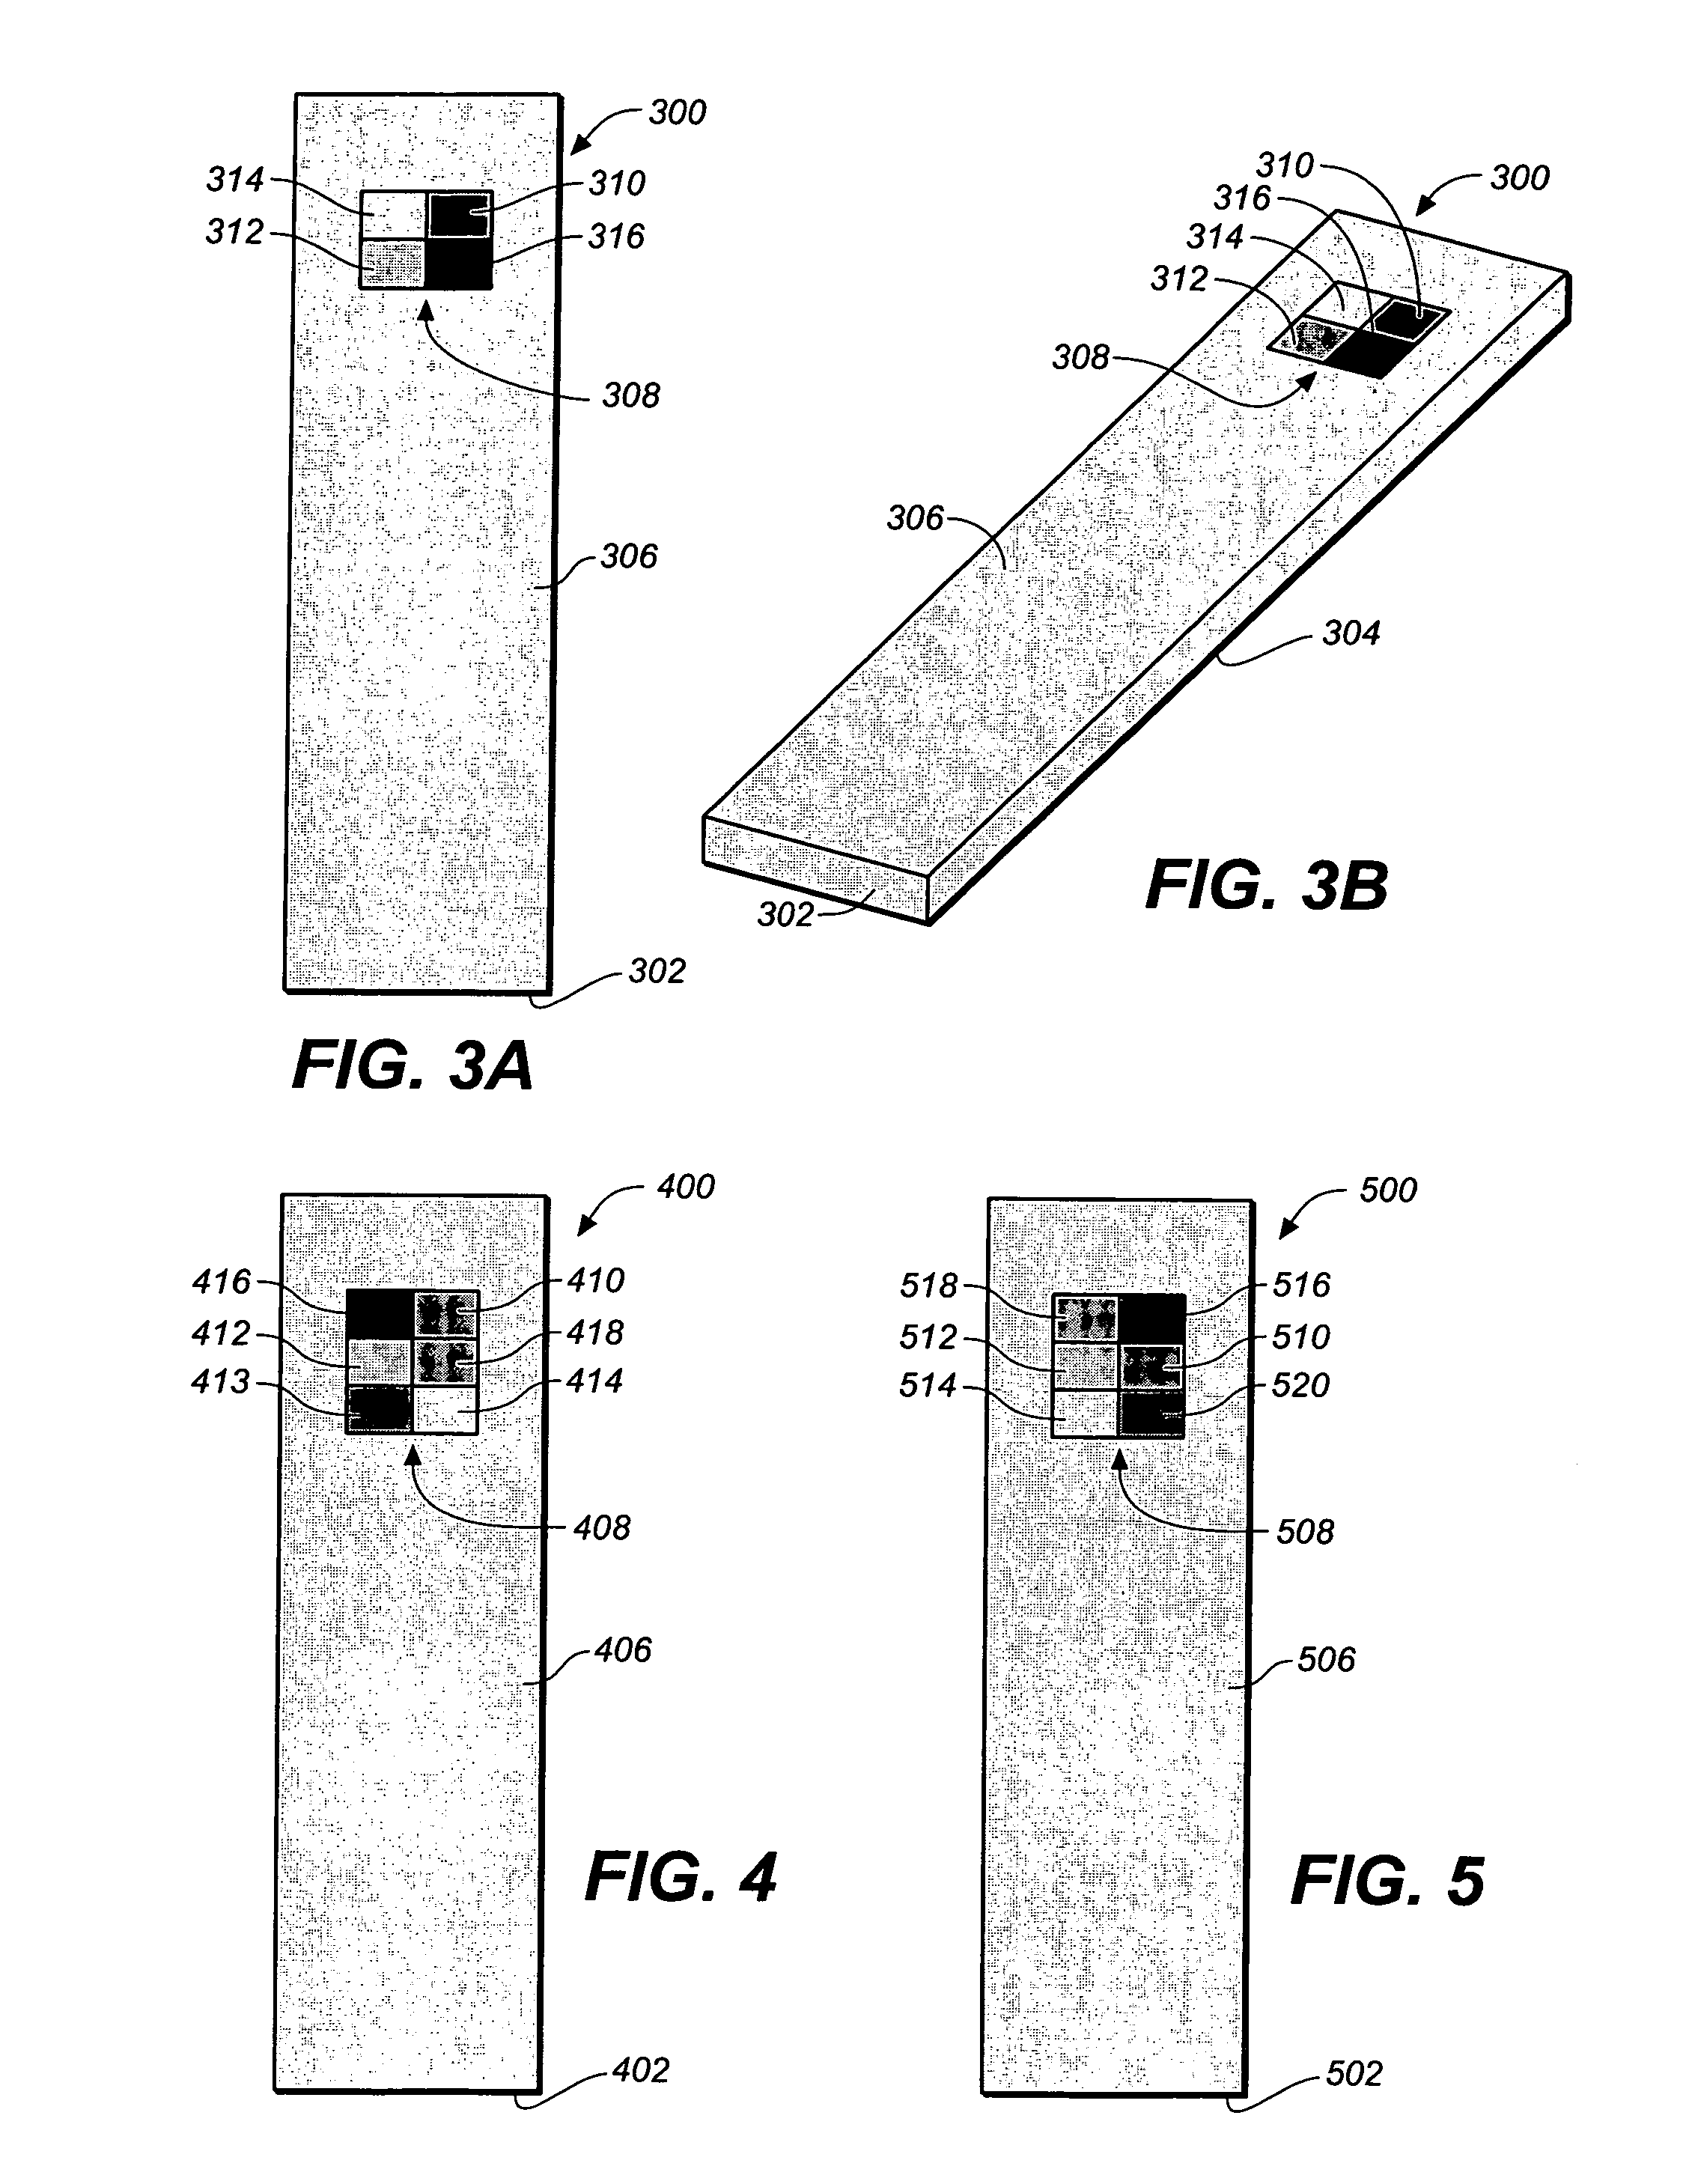 Method for determining a test strip calibration code using a calibration strip